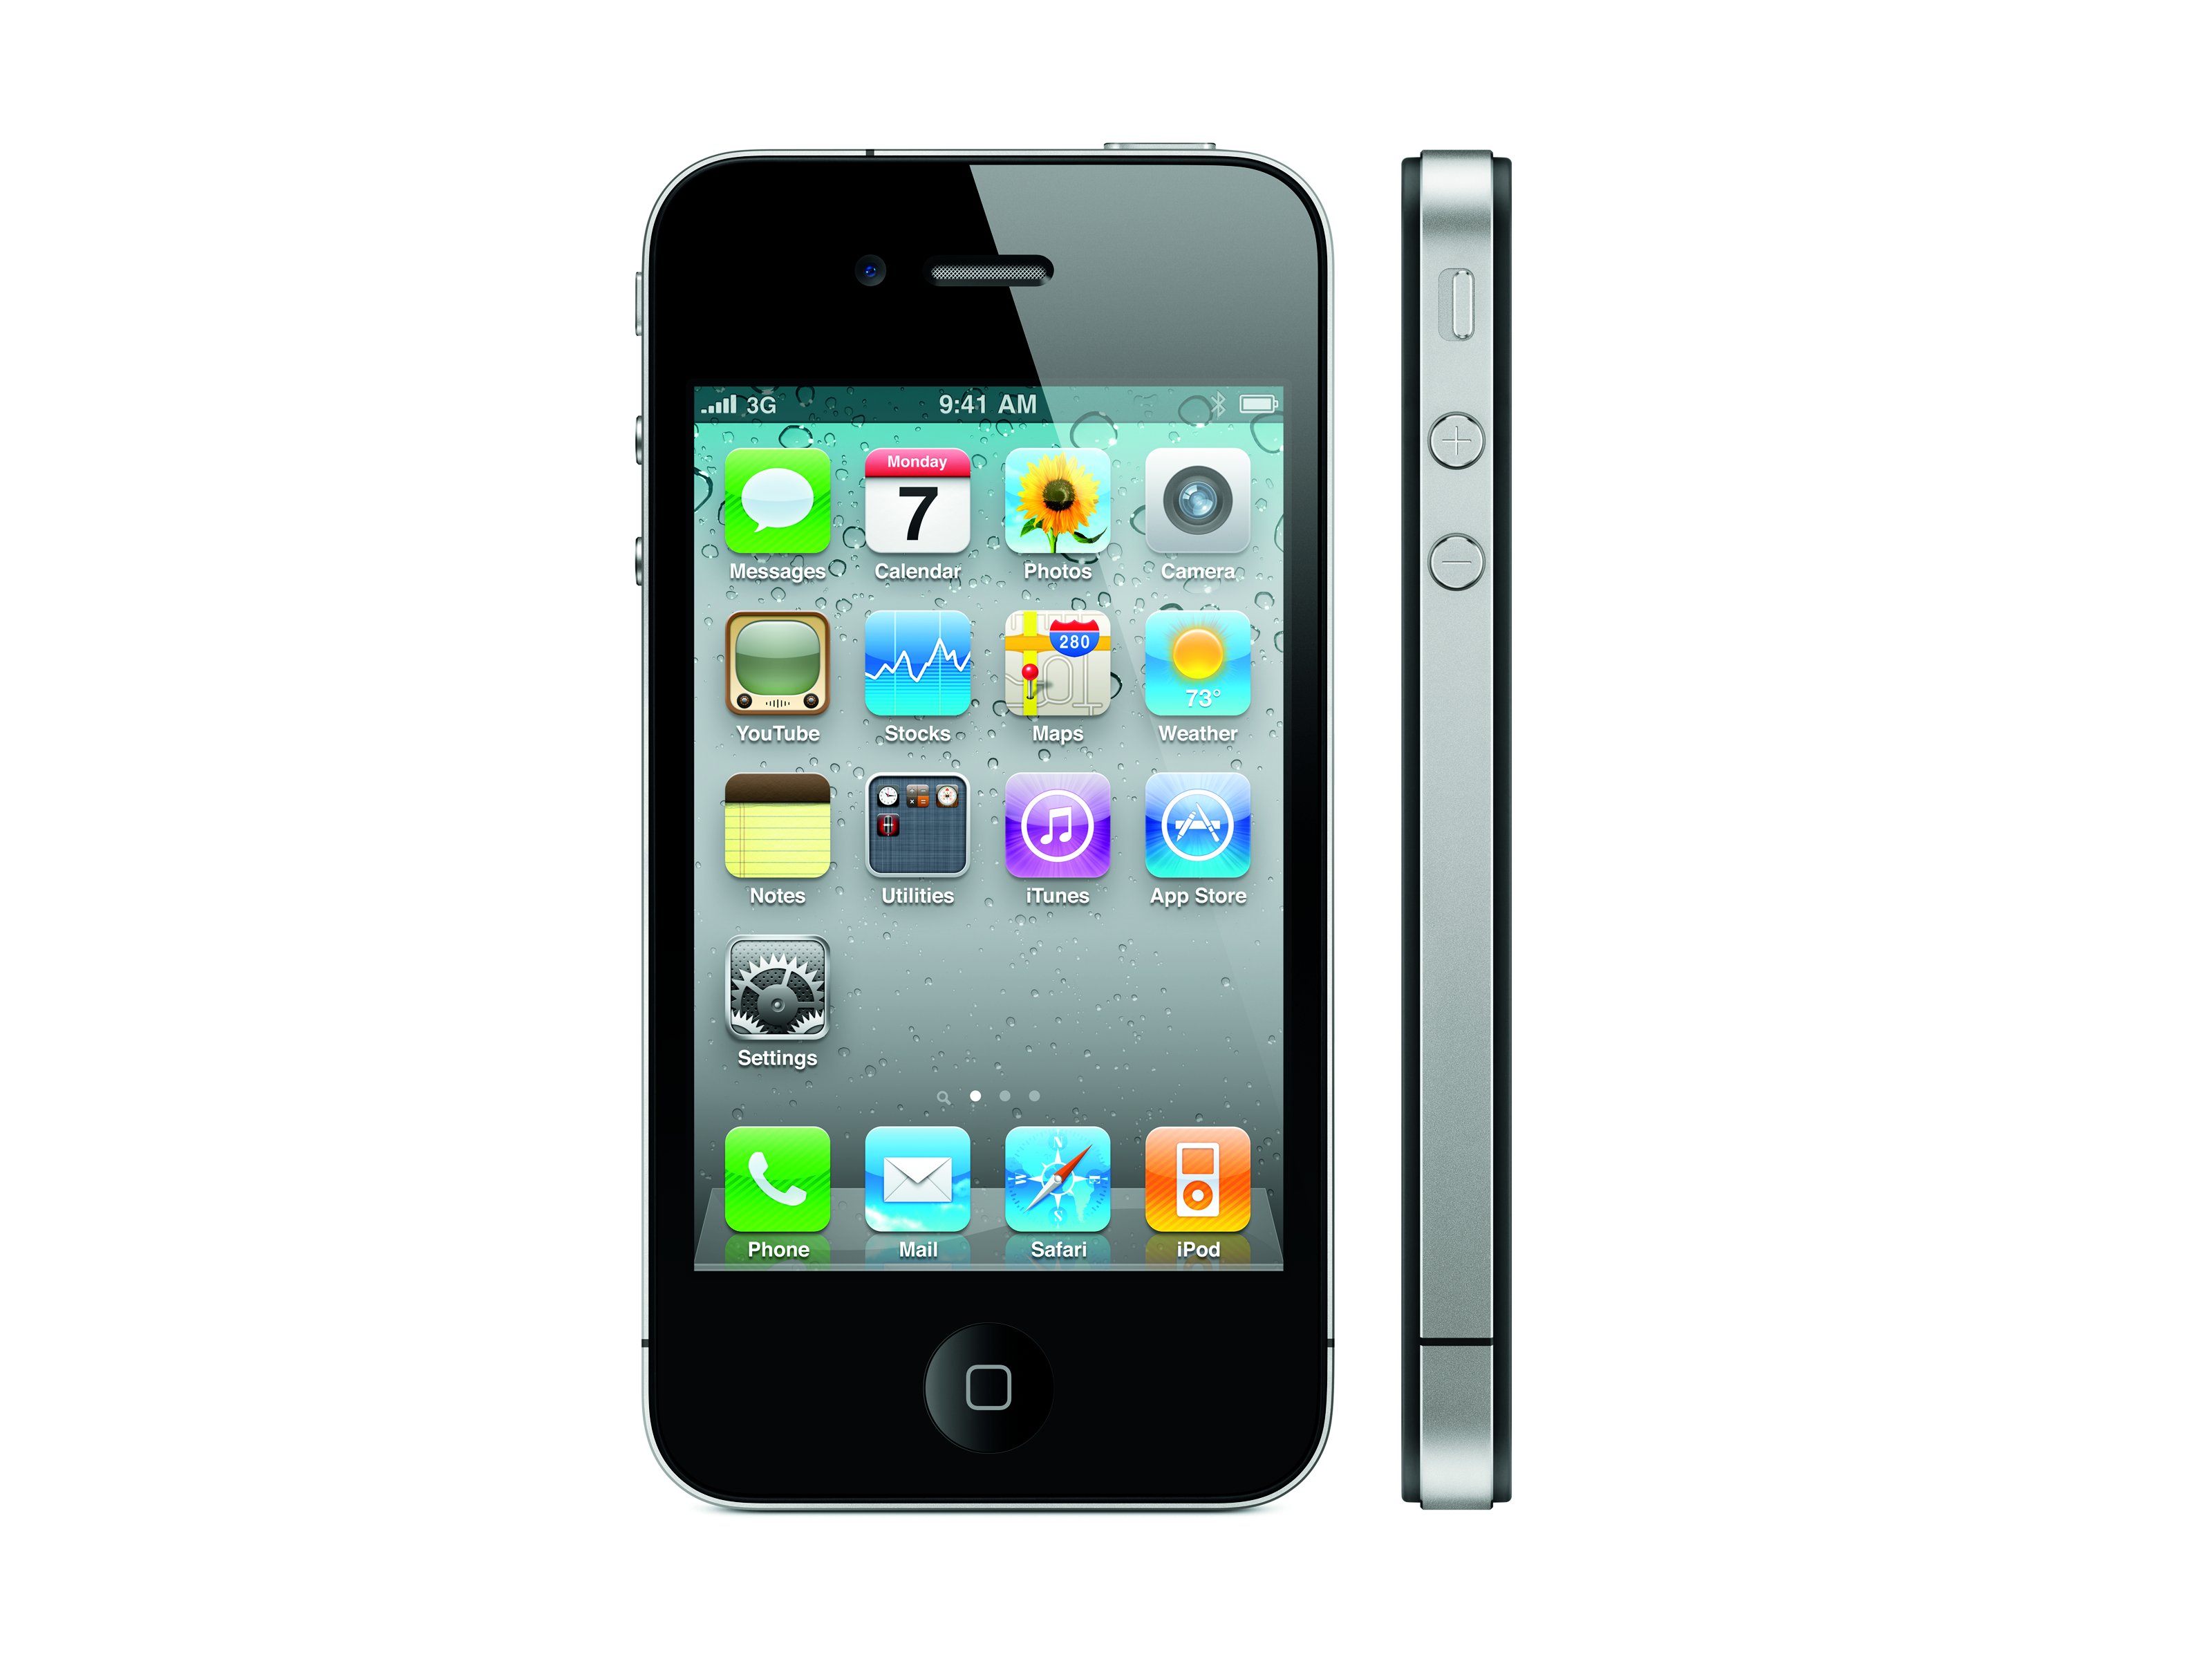 How to Fix iPhone 4 in Recovery Mode? 7